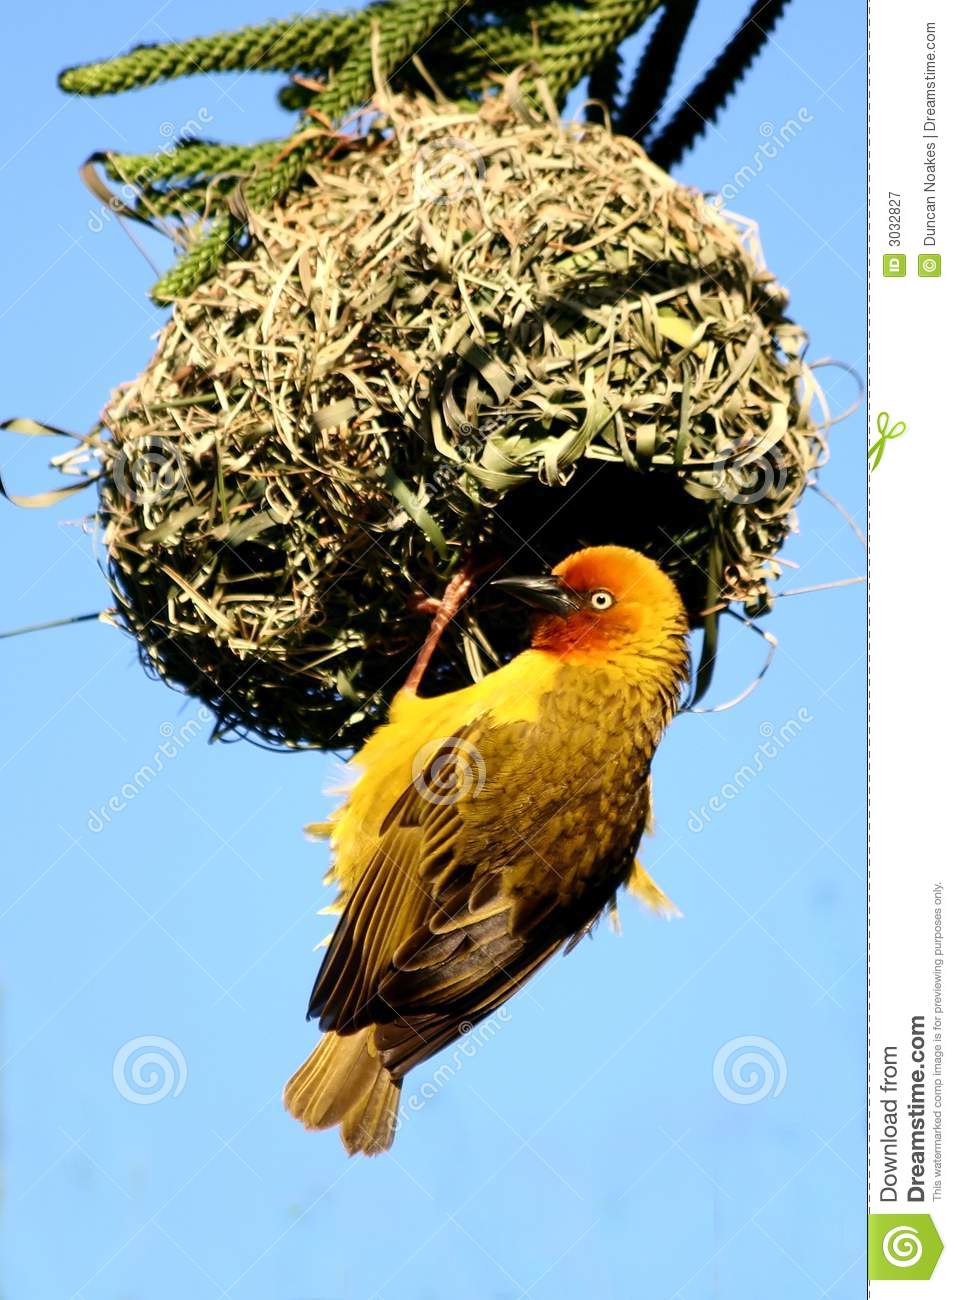 Cape Weaver Male At Nest Royalty Free Stock Photography   Image    